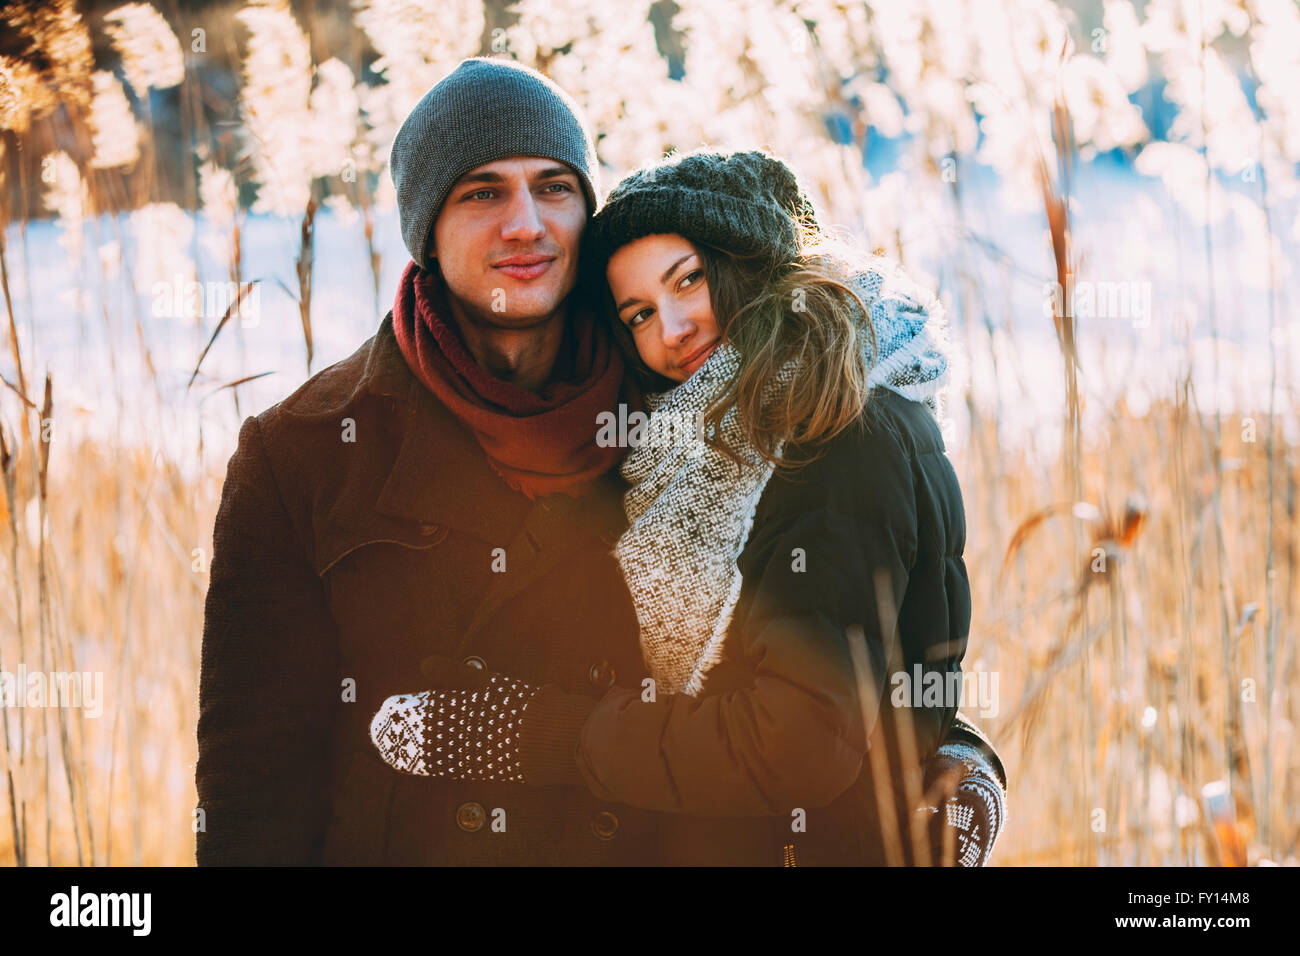 Young couple embracing while standing on field Stock Photo